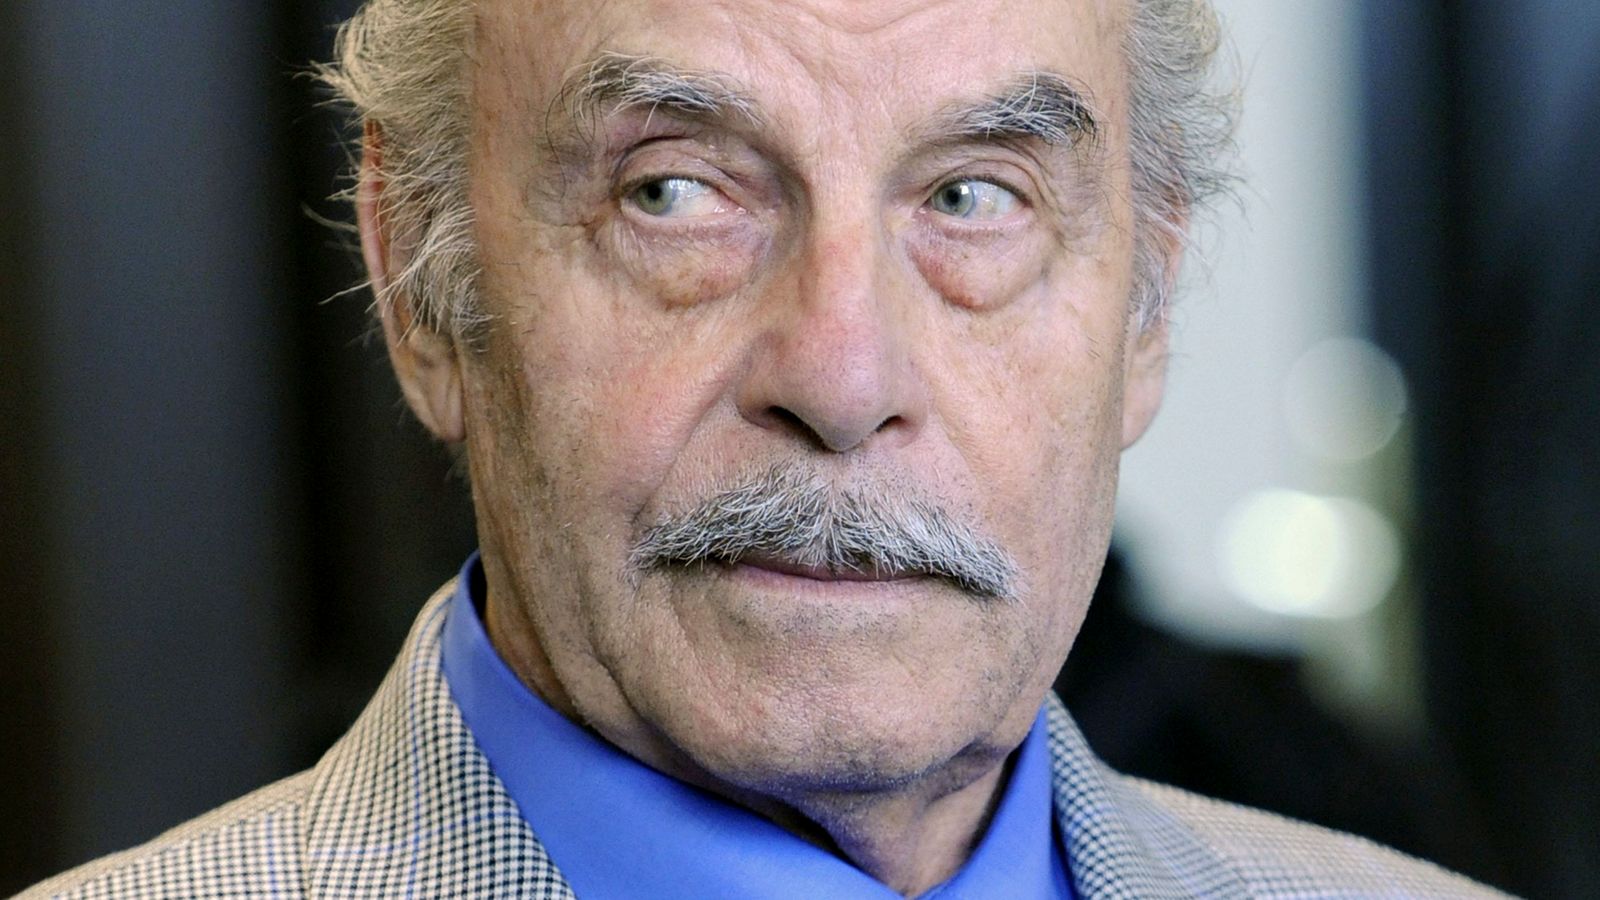 Decision to transfer rapist Josef Fritzl to regular prison overturned by Austrian court - reports